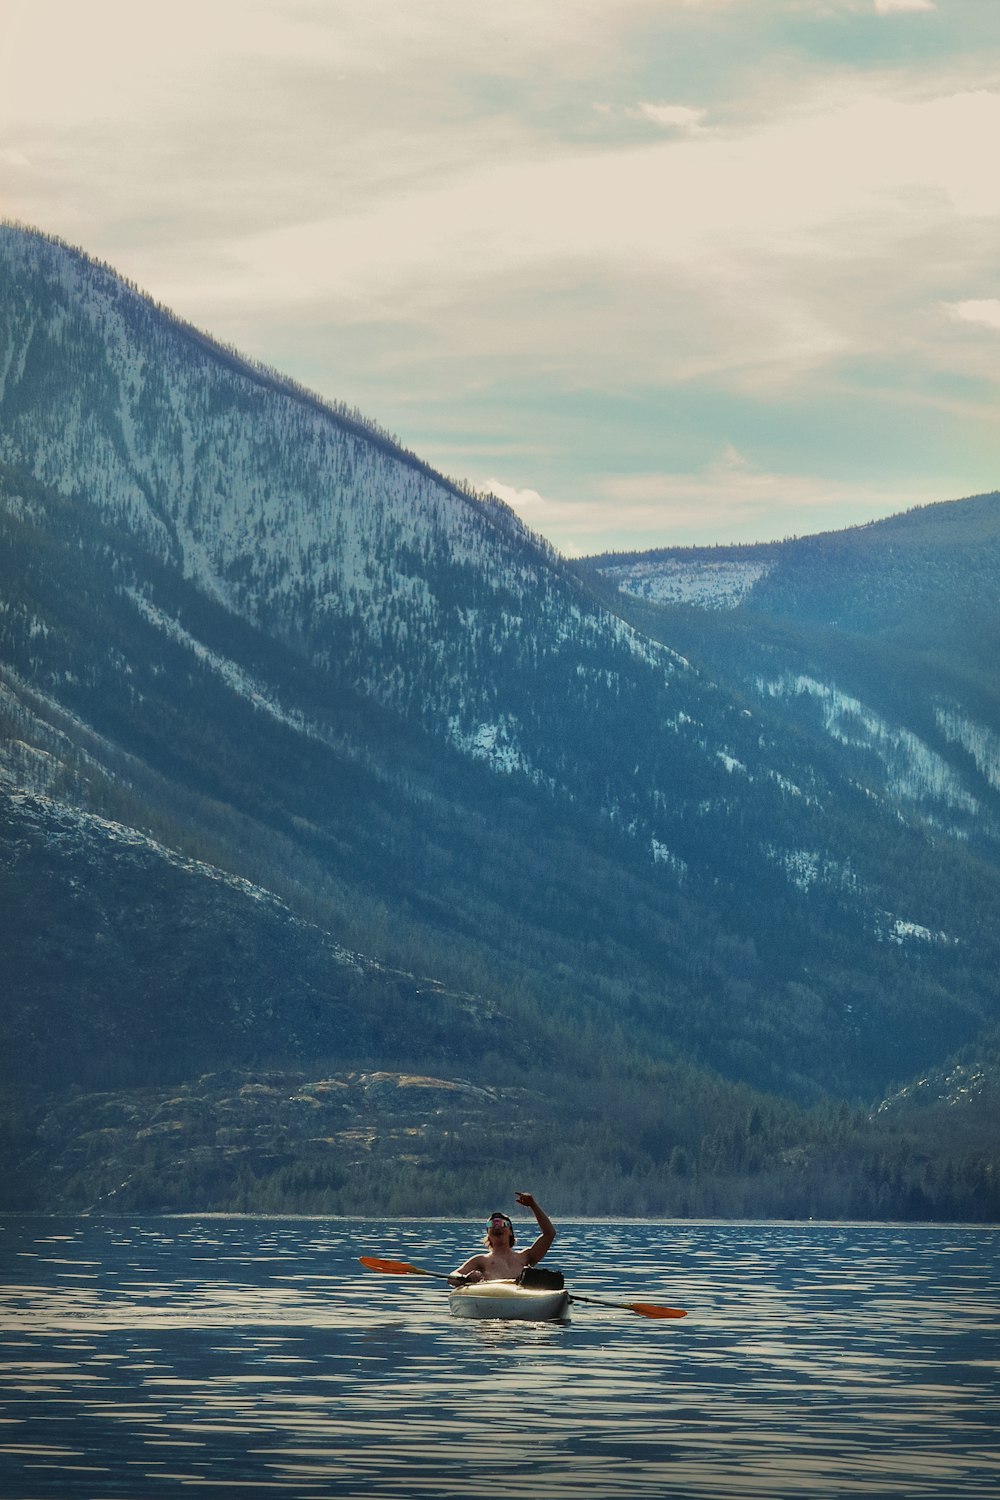 a person on a kayak in the water with mountains in the background